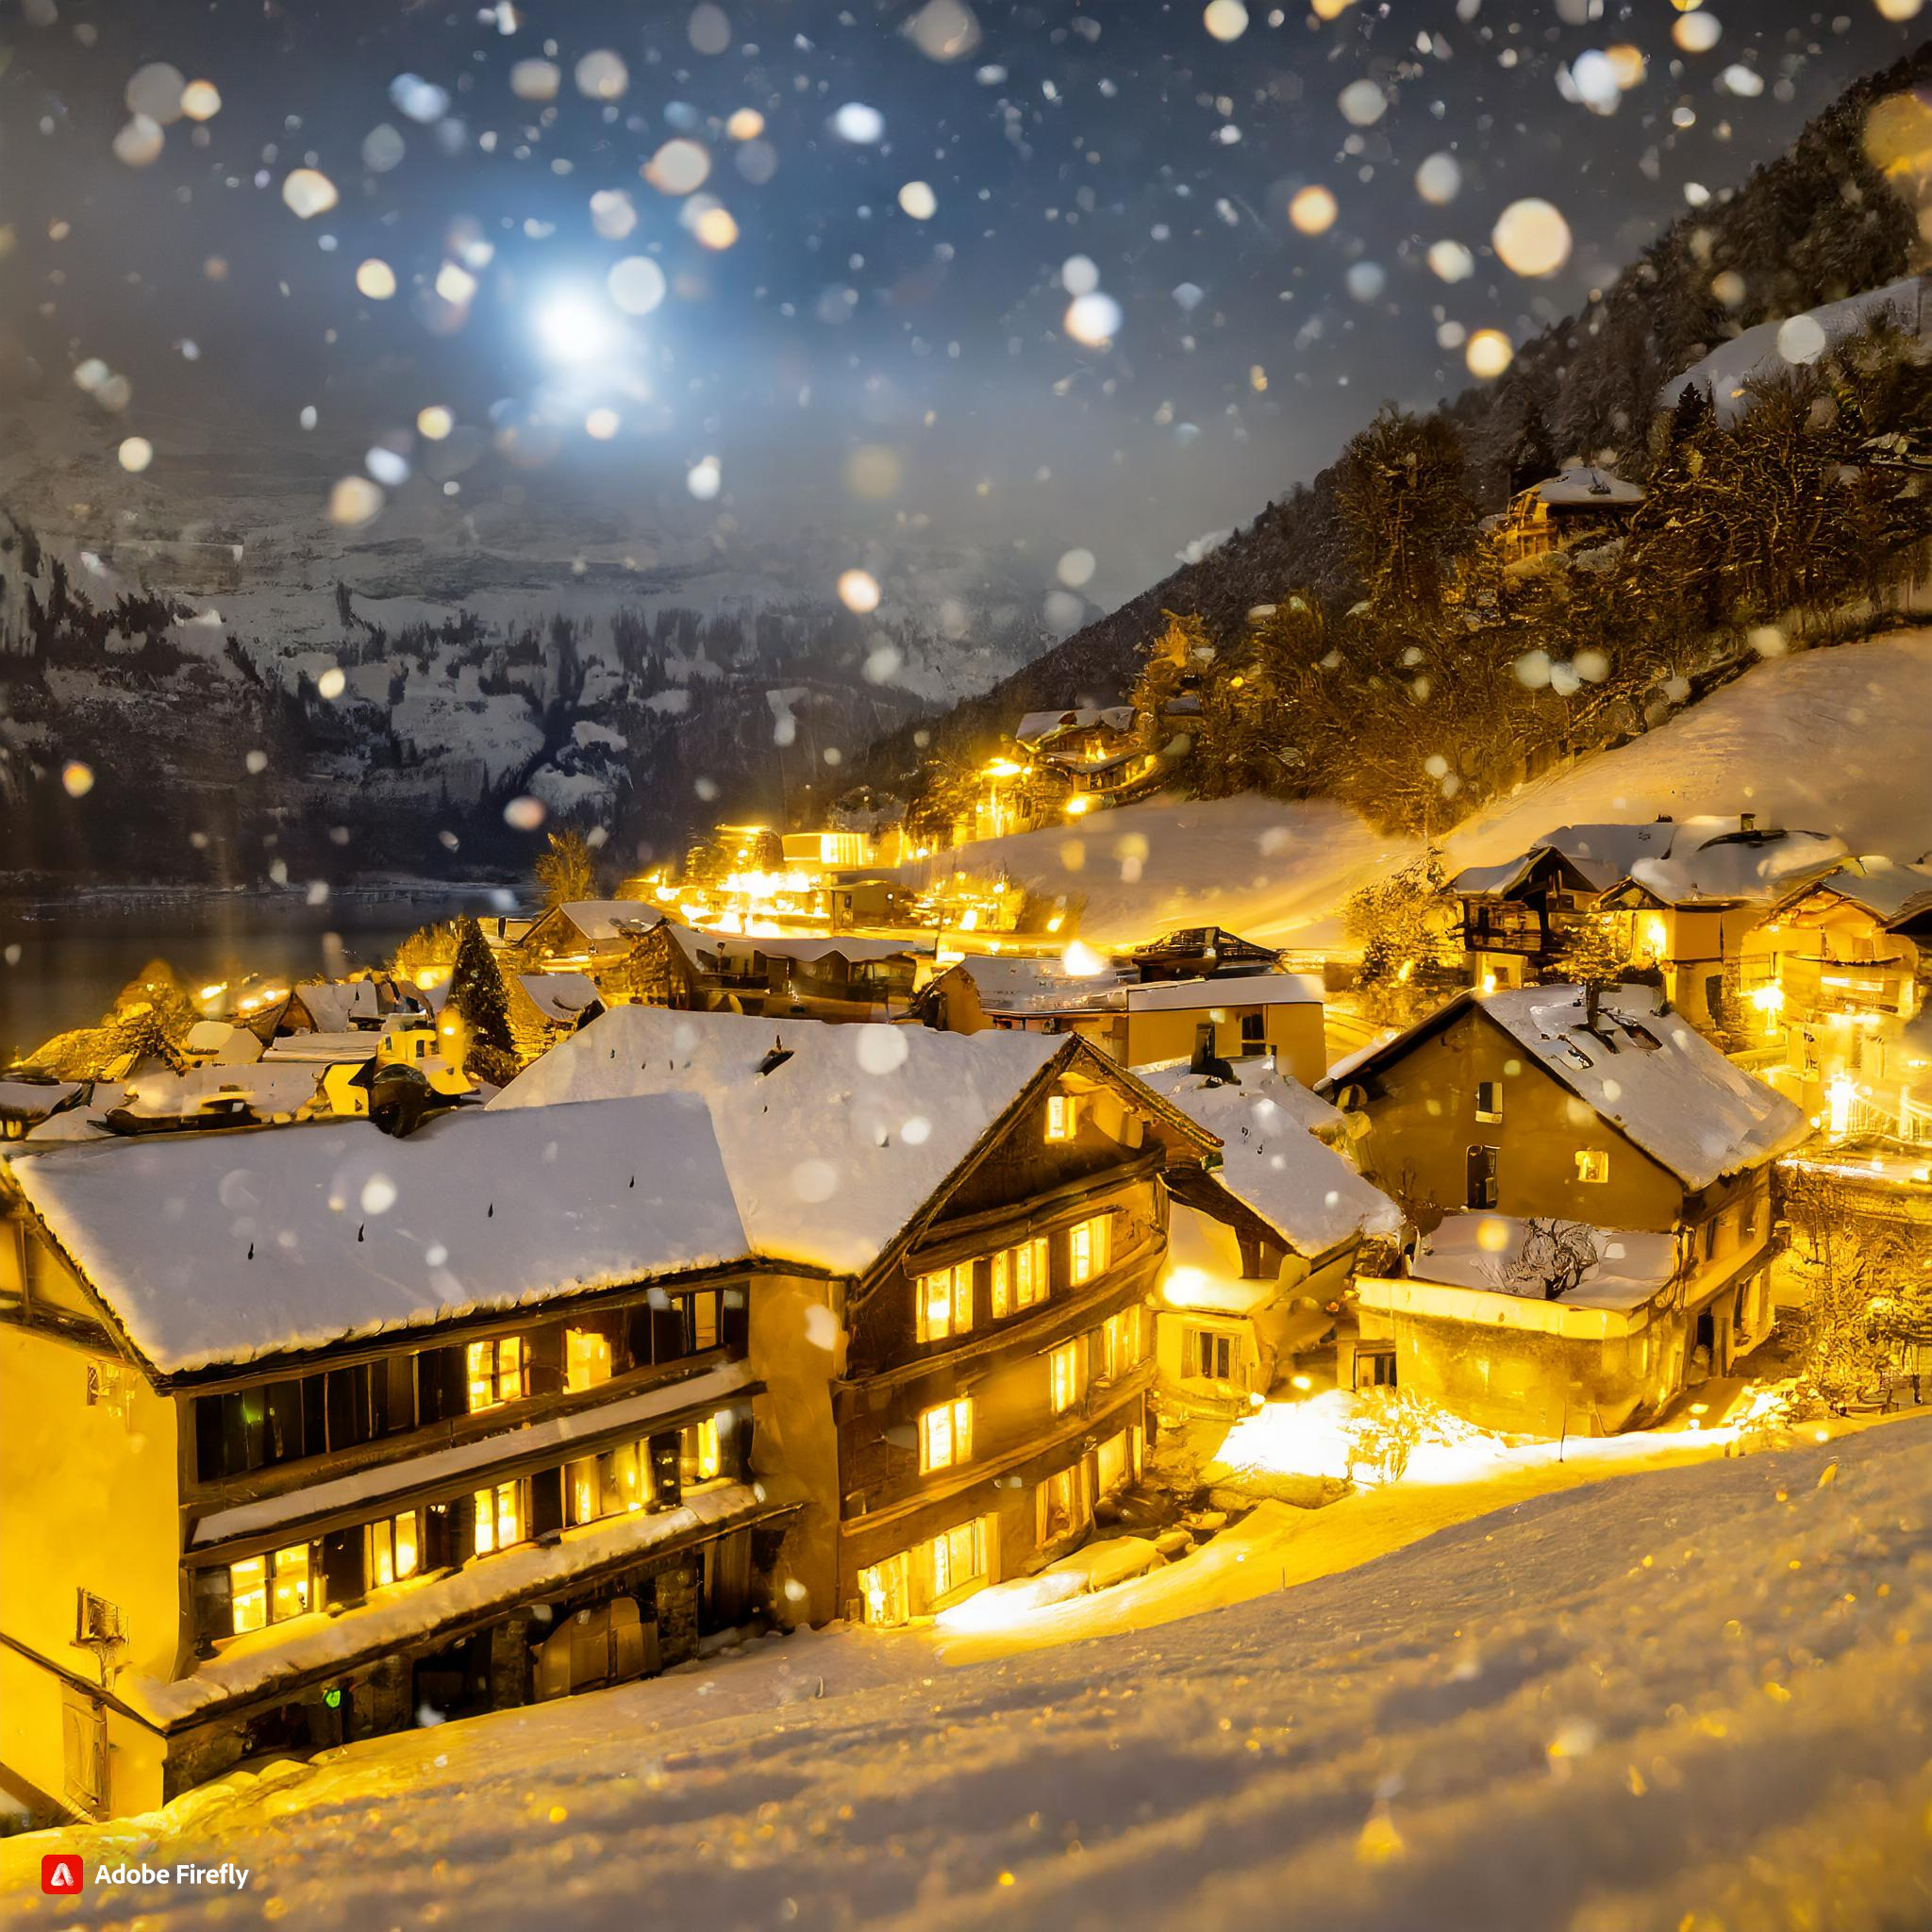  Firefly Switzerland at night covered in snow with lights shining through windows of houses